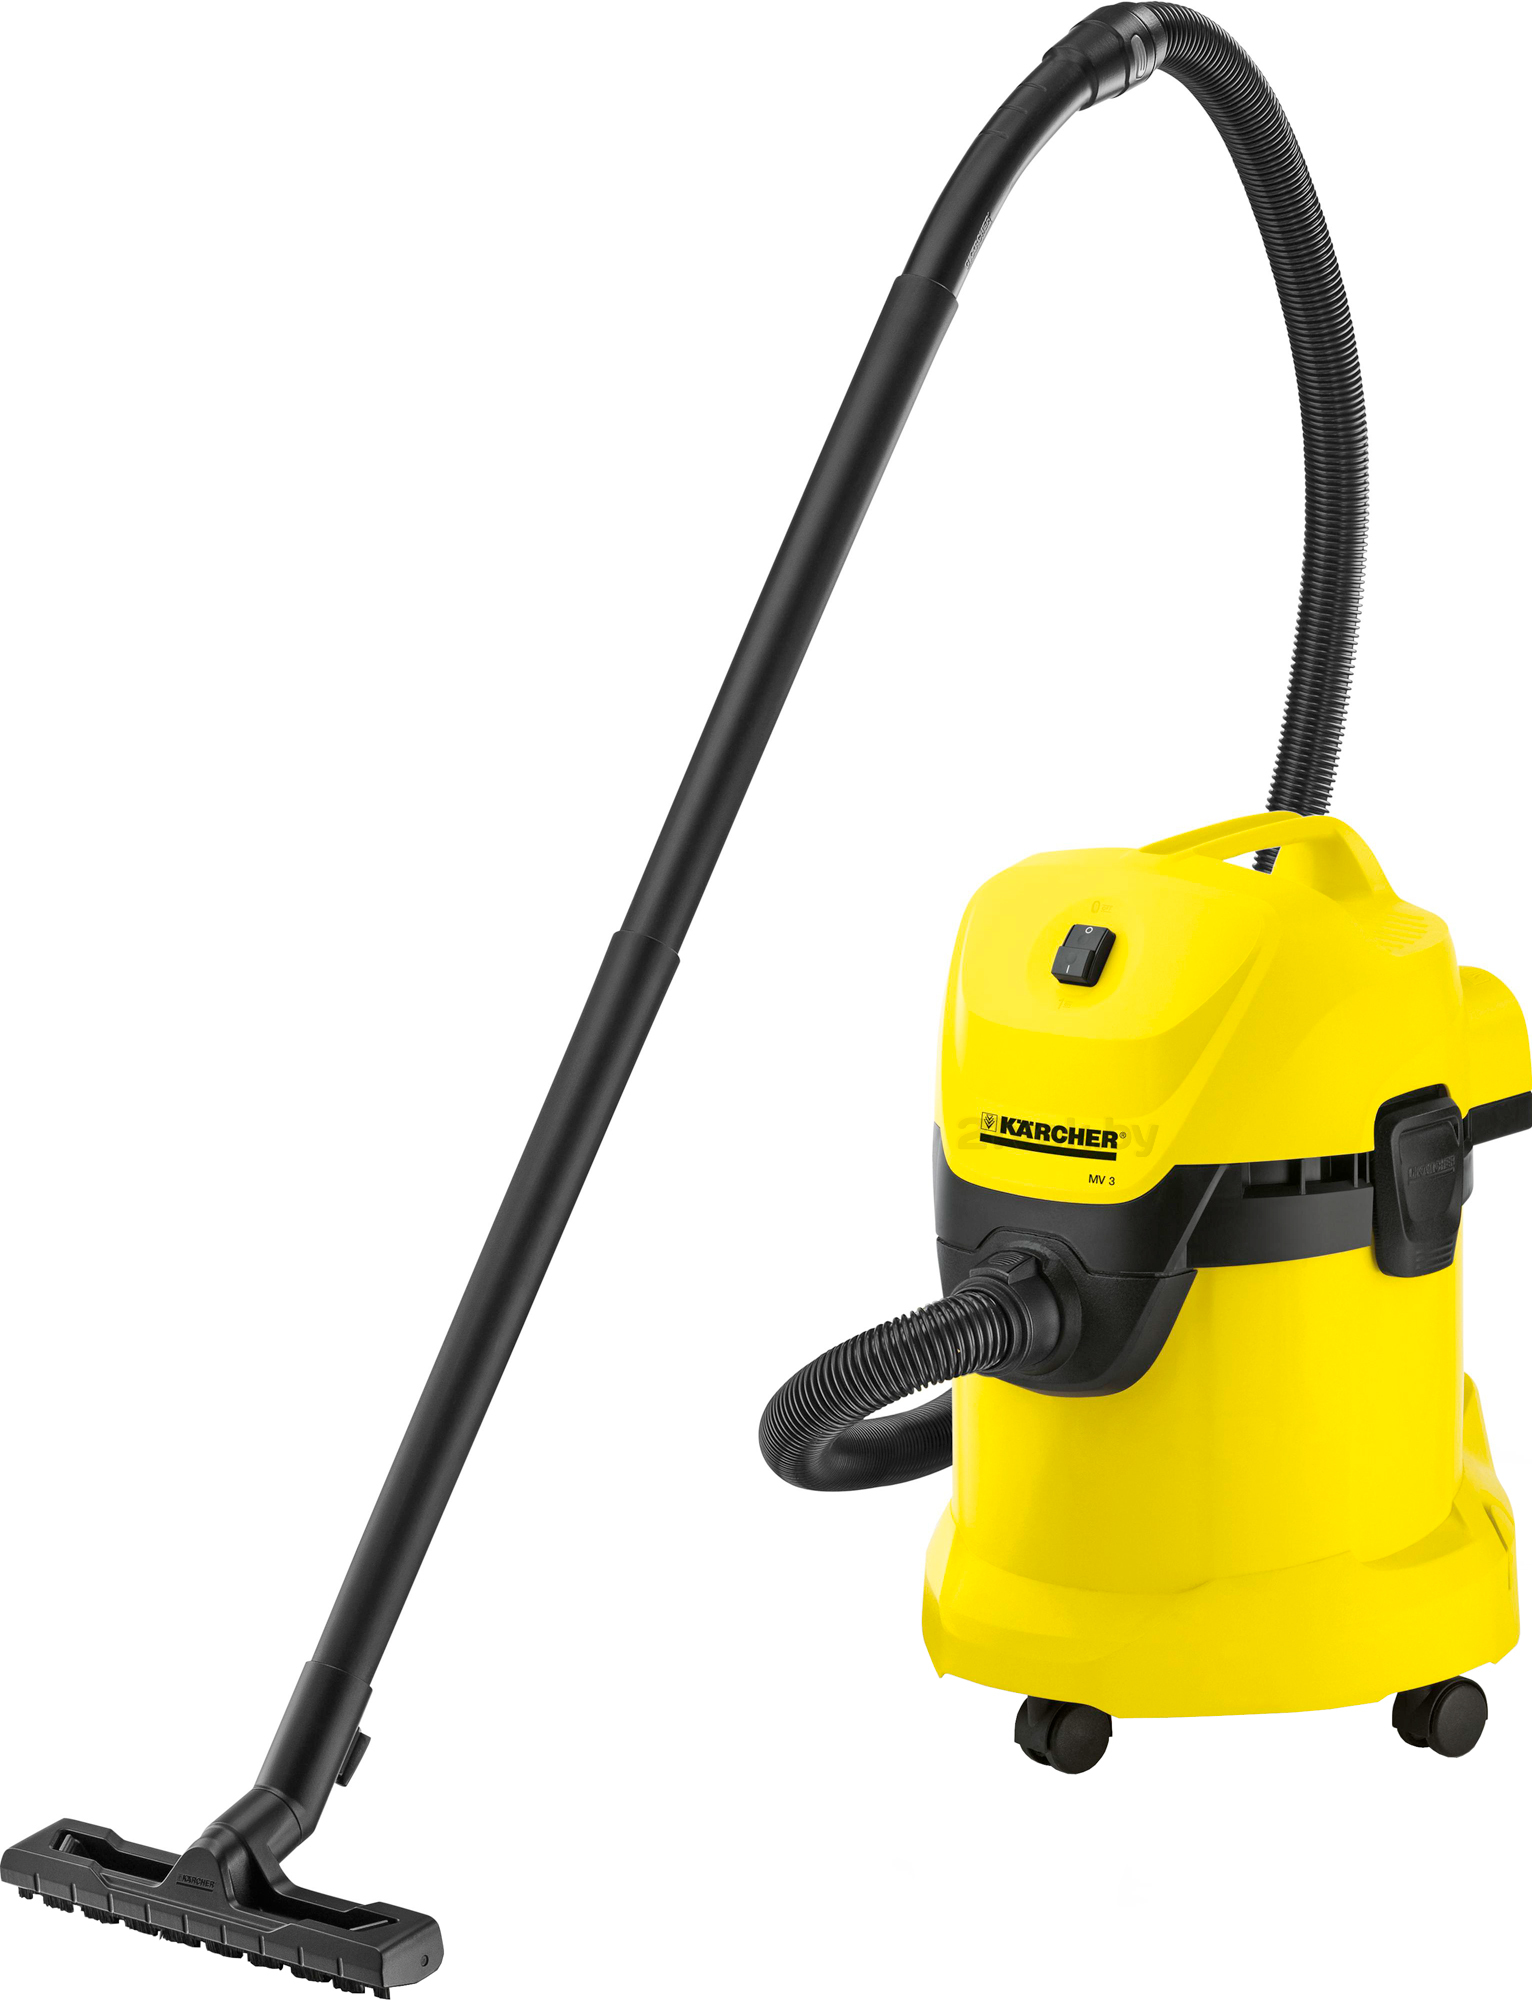 Aliexpress - vacuum cleaners for home wash and for cleaning dust